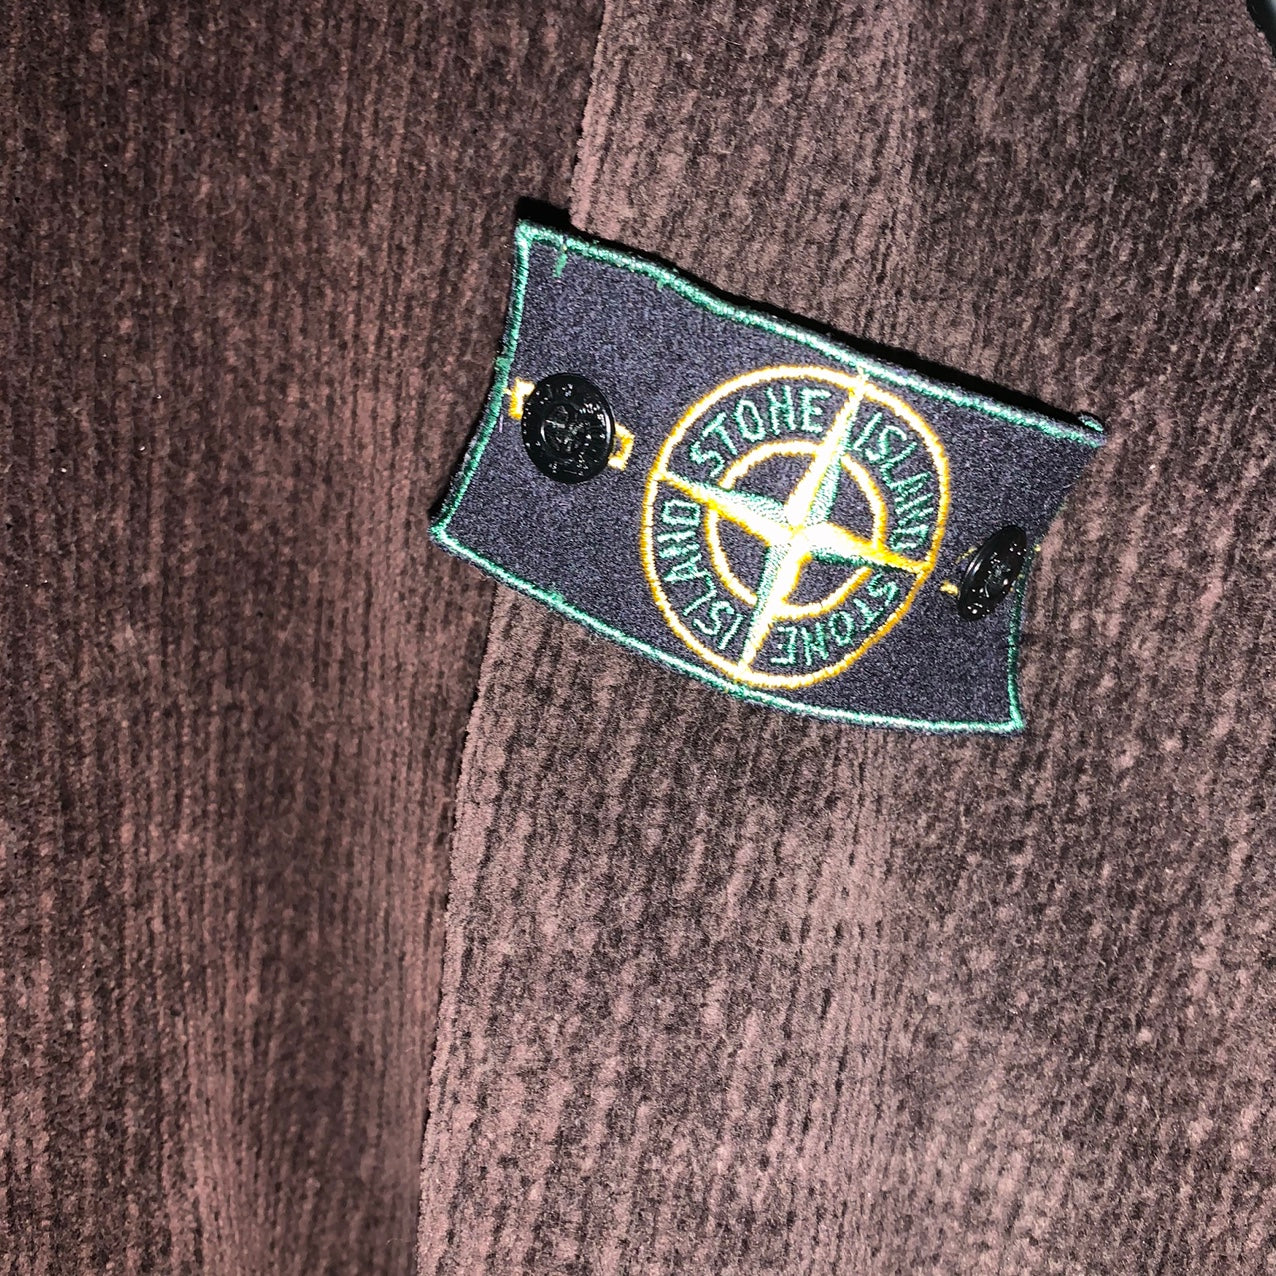 Stone Island Vintage Knit AW1998 complete with Green Edged Badge 98% Cotton Chenille Mix size XL